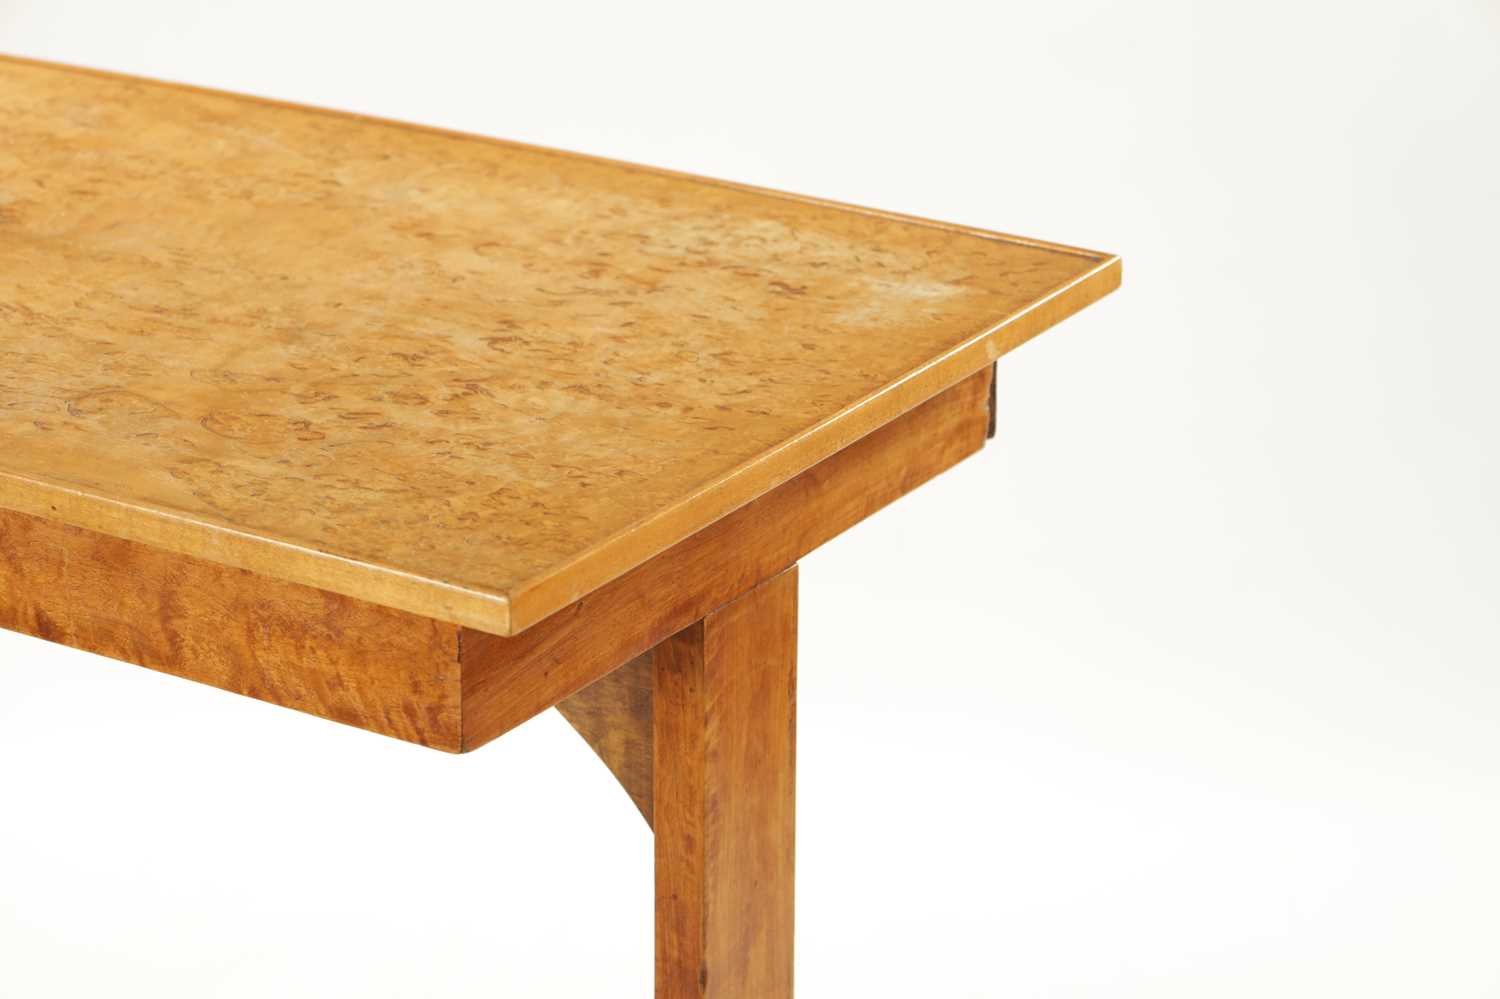 A 19TH CENTURY BURR MAPLE SIDE TABLE - Image 3 of 5